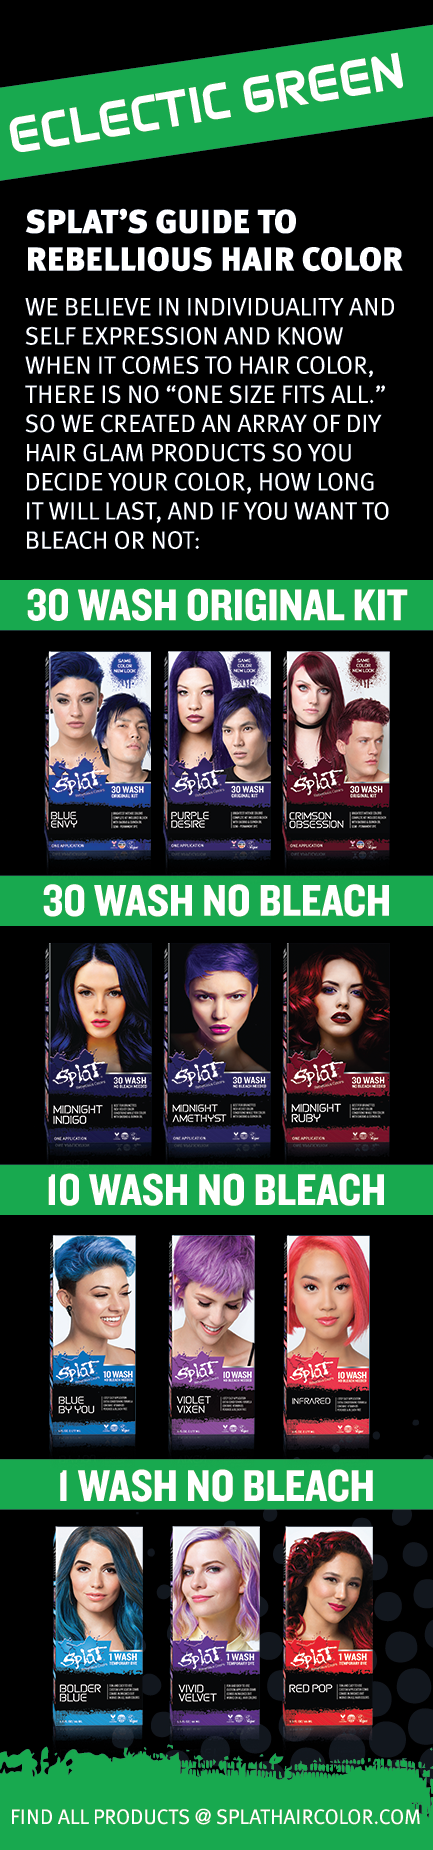 Splat 1 Wash Eclectic Green Hair Color, Temporary Bleach Free Green Hair Dye - image 5 of 8